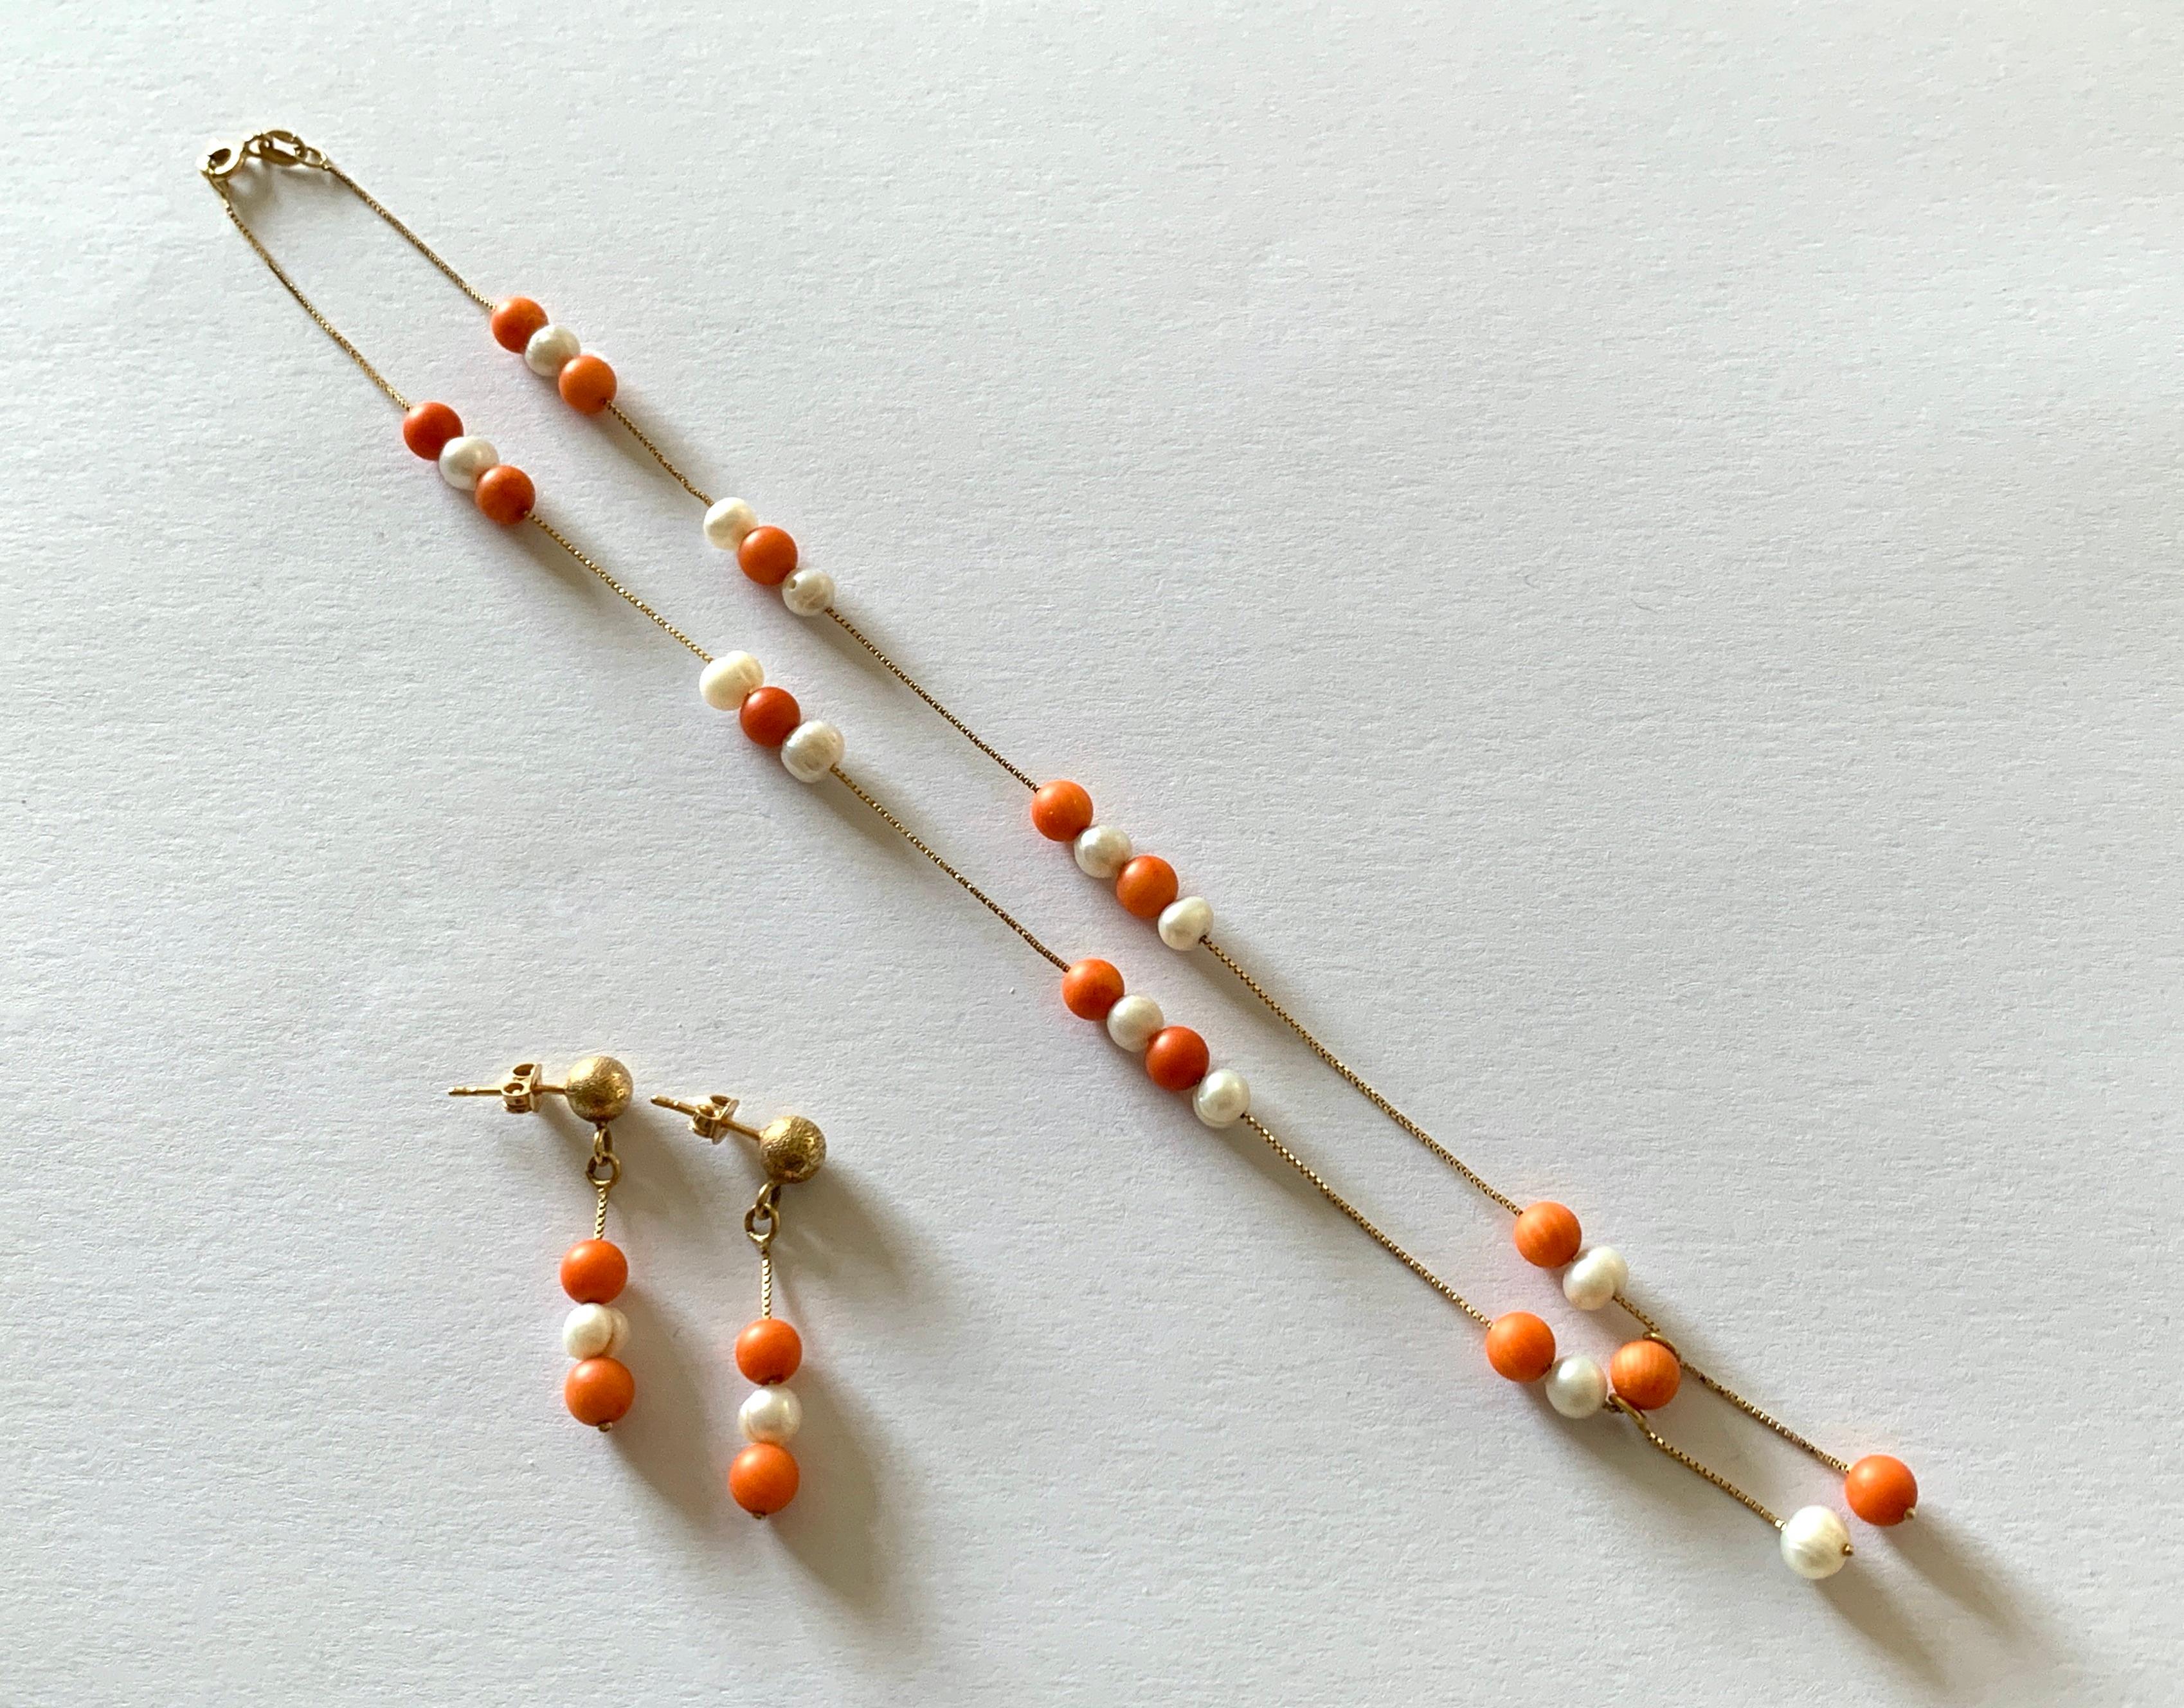 18ct 750 Gold Beaded Choker Necklace & Matching earrings 
Comprises of Natural Coral & Naturally Cultivated Potato Pearl Beads

Each bead is approx. 5mm Diameter

Weight of the necklace is 8.68 grams
Length of necklace is 15